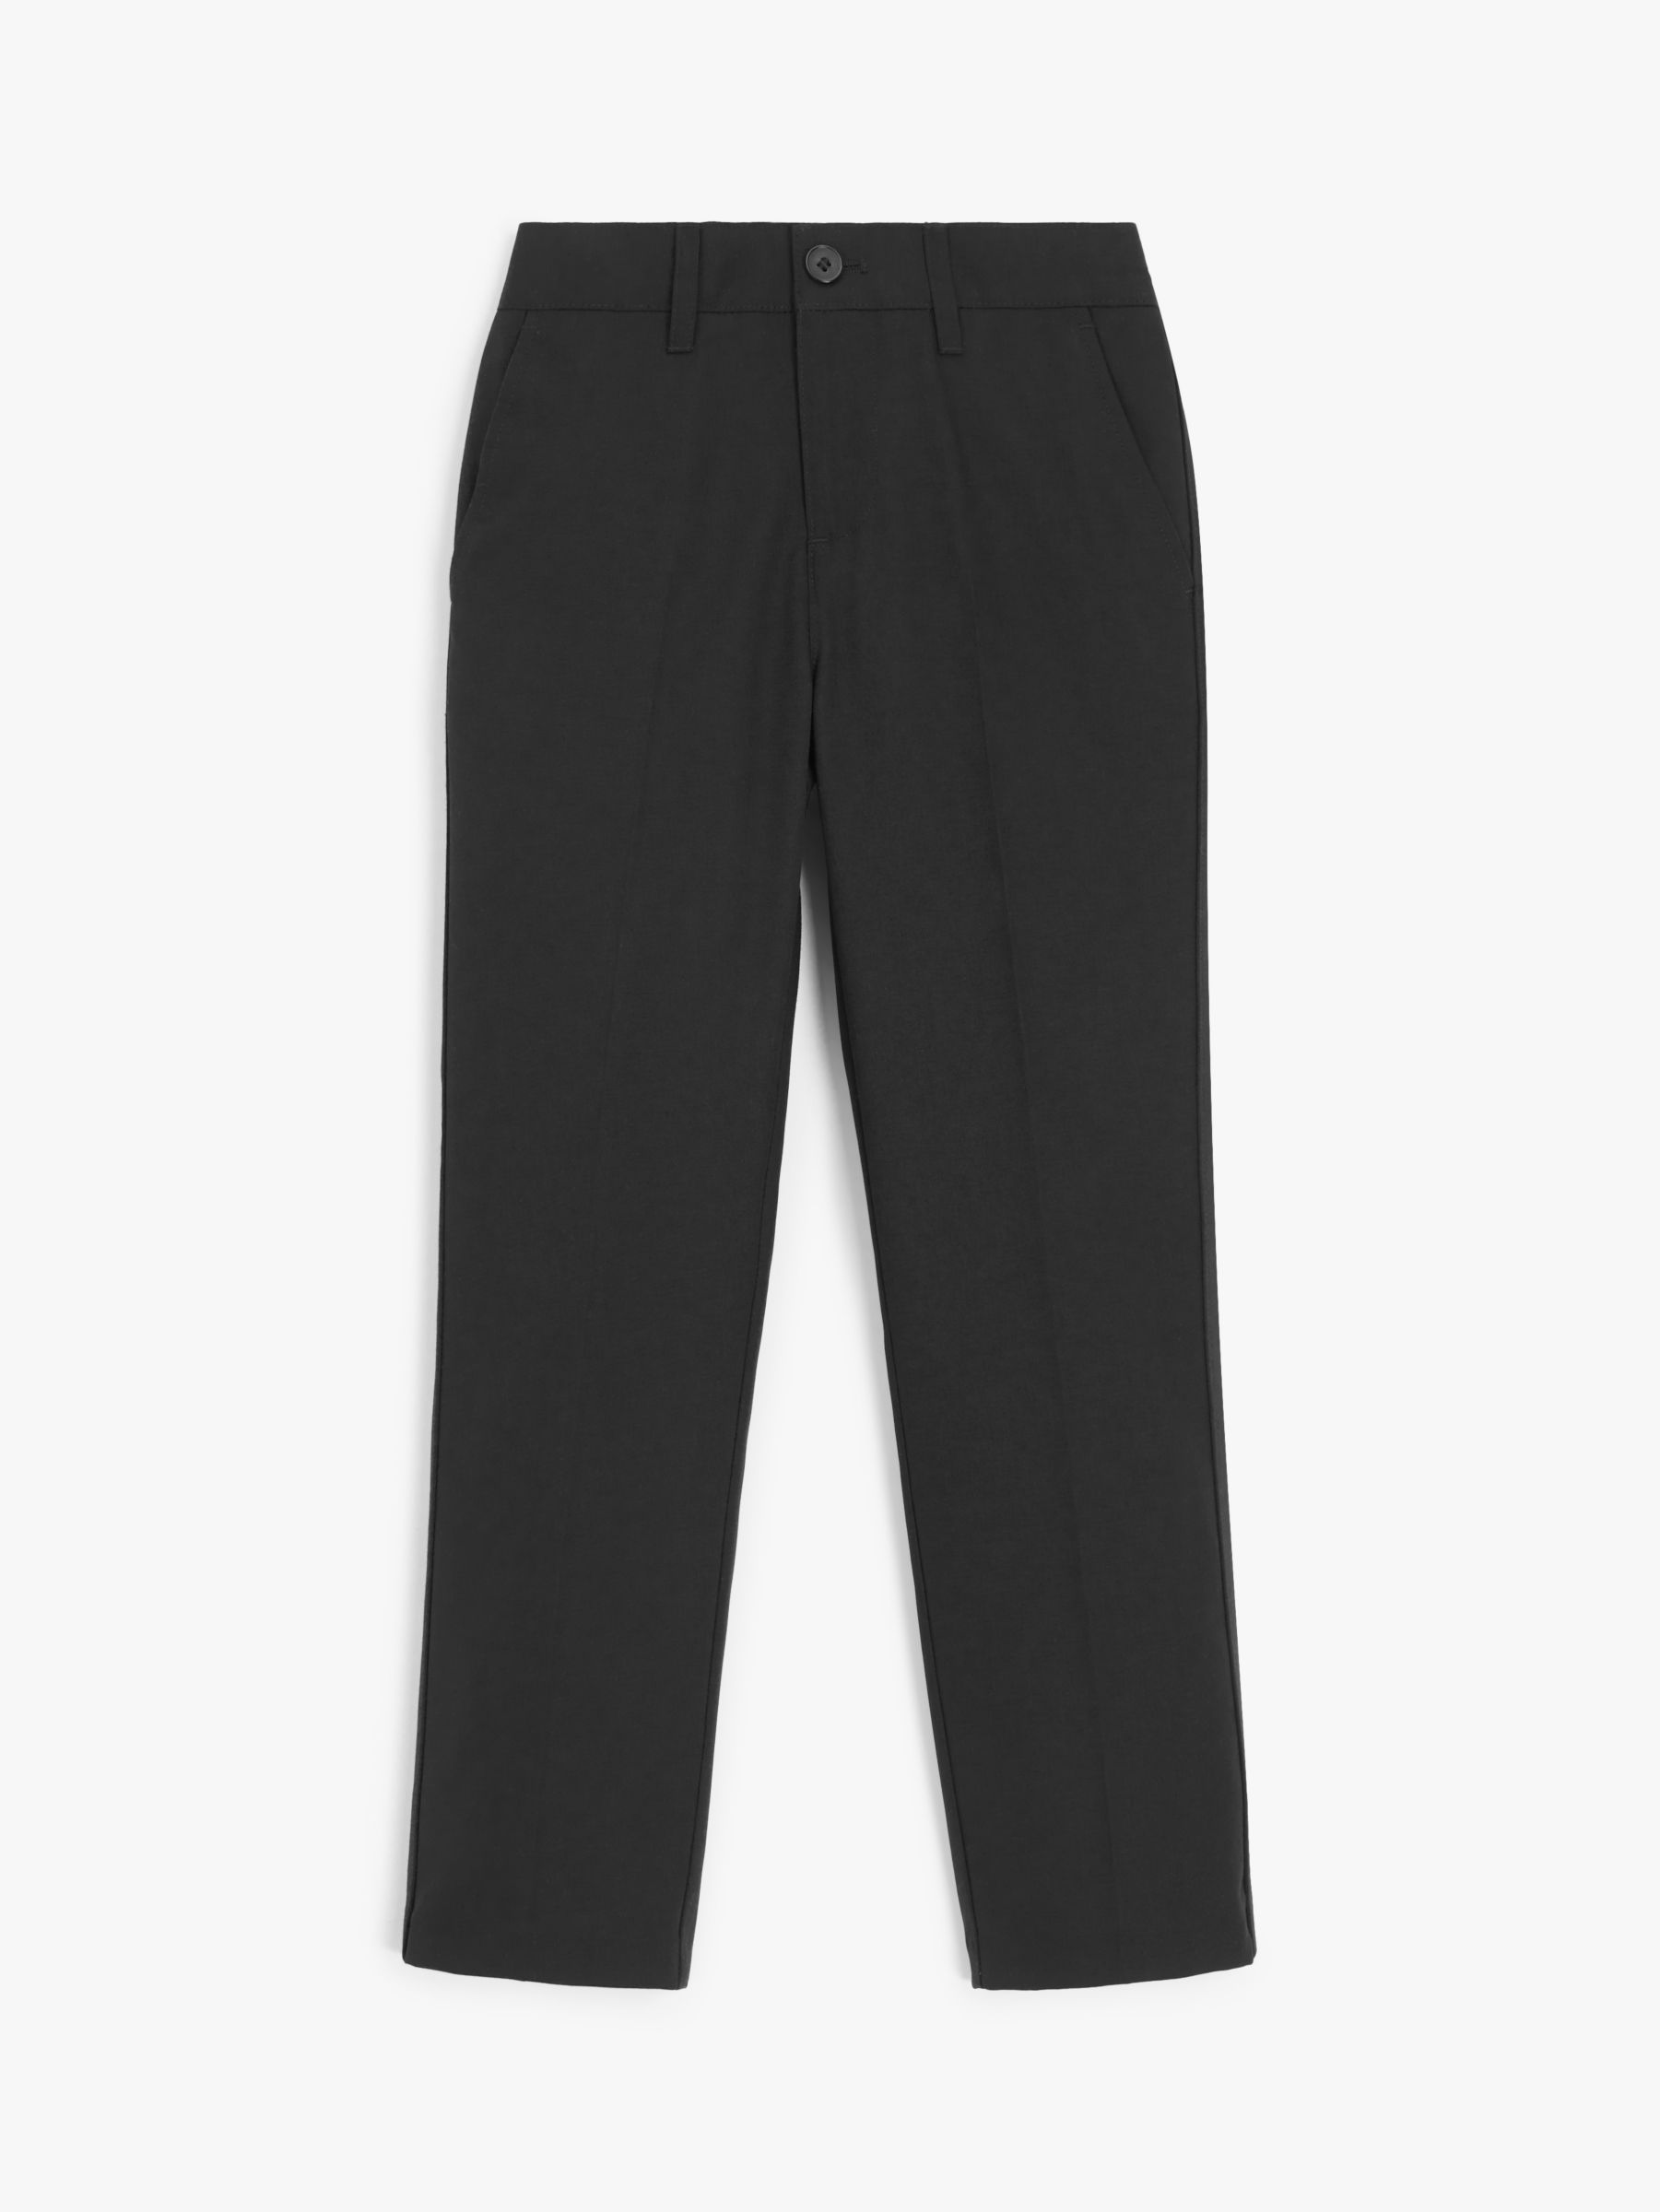 John Lewis Heirloom Collection Kids' Tuxedo Trousers, Black, 2 years